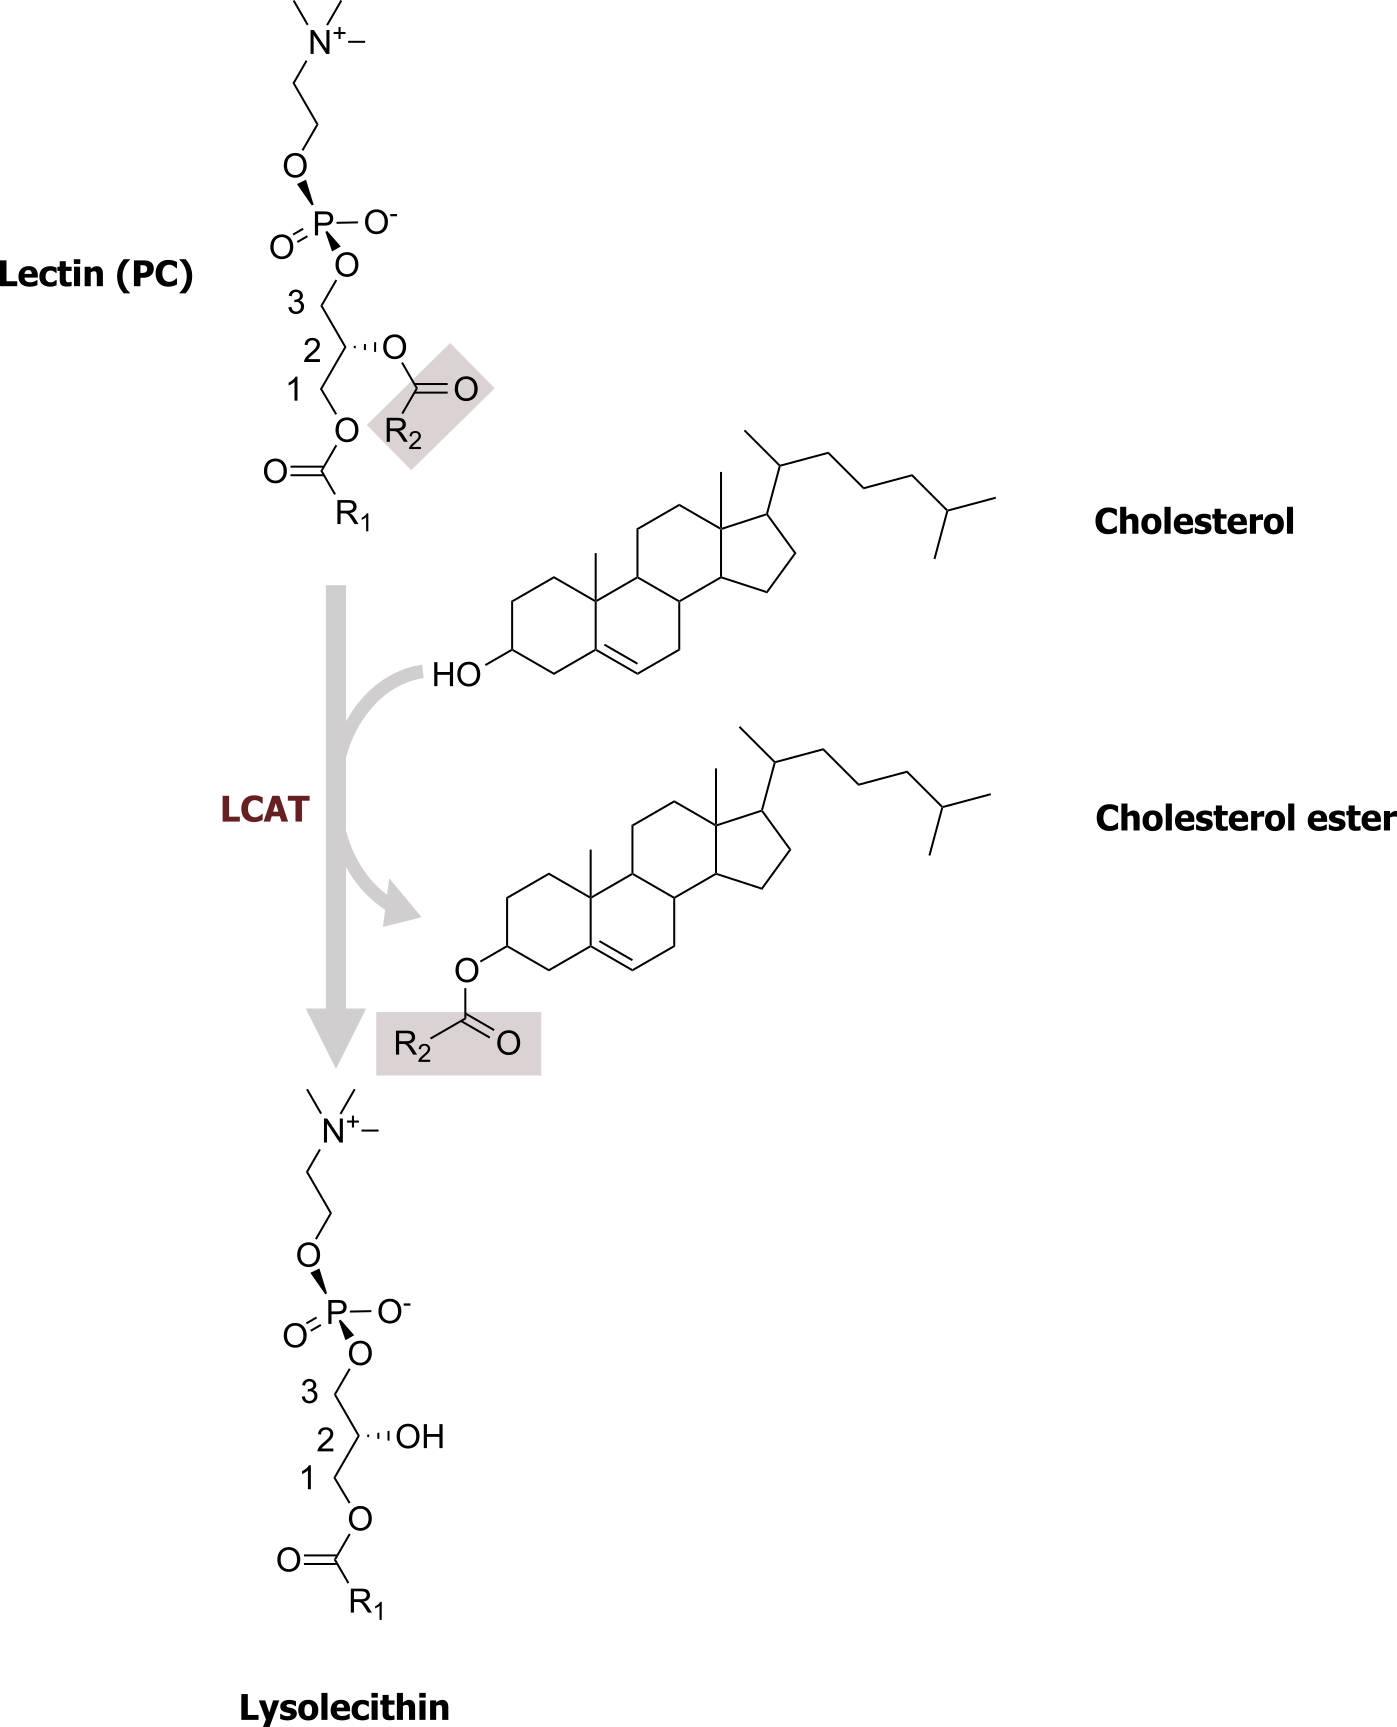 Lecithin arrow with enzyme LCAT and addition of cholesterol and cholesterol ester to lysolecithin.Lecithin IUPAC ID: 1,3-di(octadecanoyloxy)propan-2-yl 2-(trimethylazaniumyl)ethyl phosphate. Cholesterol ester IUPAC ID: [(3S,8S,9S,10R,13R,14S,17R)-10,13-dimethyl-17-[(2R)-6-methylheptan-2-yl]-2,3,4,7,8,9,11,12,14,15,16,17-dodecahydro-1H-cyclopenta[a]phenanthren-3-yl] (5Z,8Z,11Z)-icosa-5,8,11-trienoate. Lysolecithin IUPAC ID: (3-hexadecanoyloxy-2-hydroxypropyl) 2-(trimethylazaniumyl)ethyl phosphate. Cholesterol IUPAC ID: described in figure 6.1.